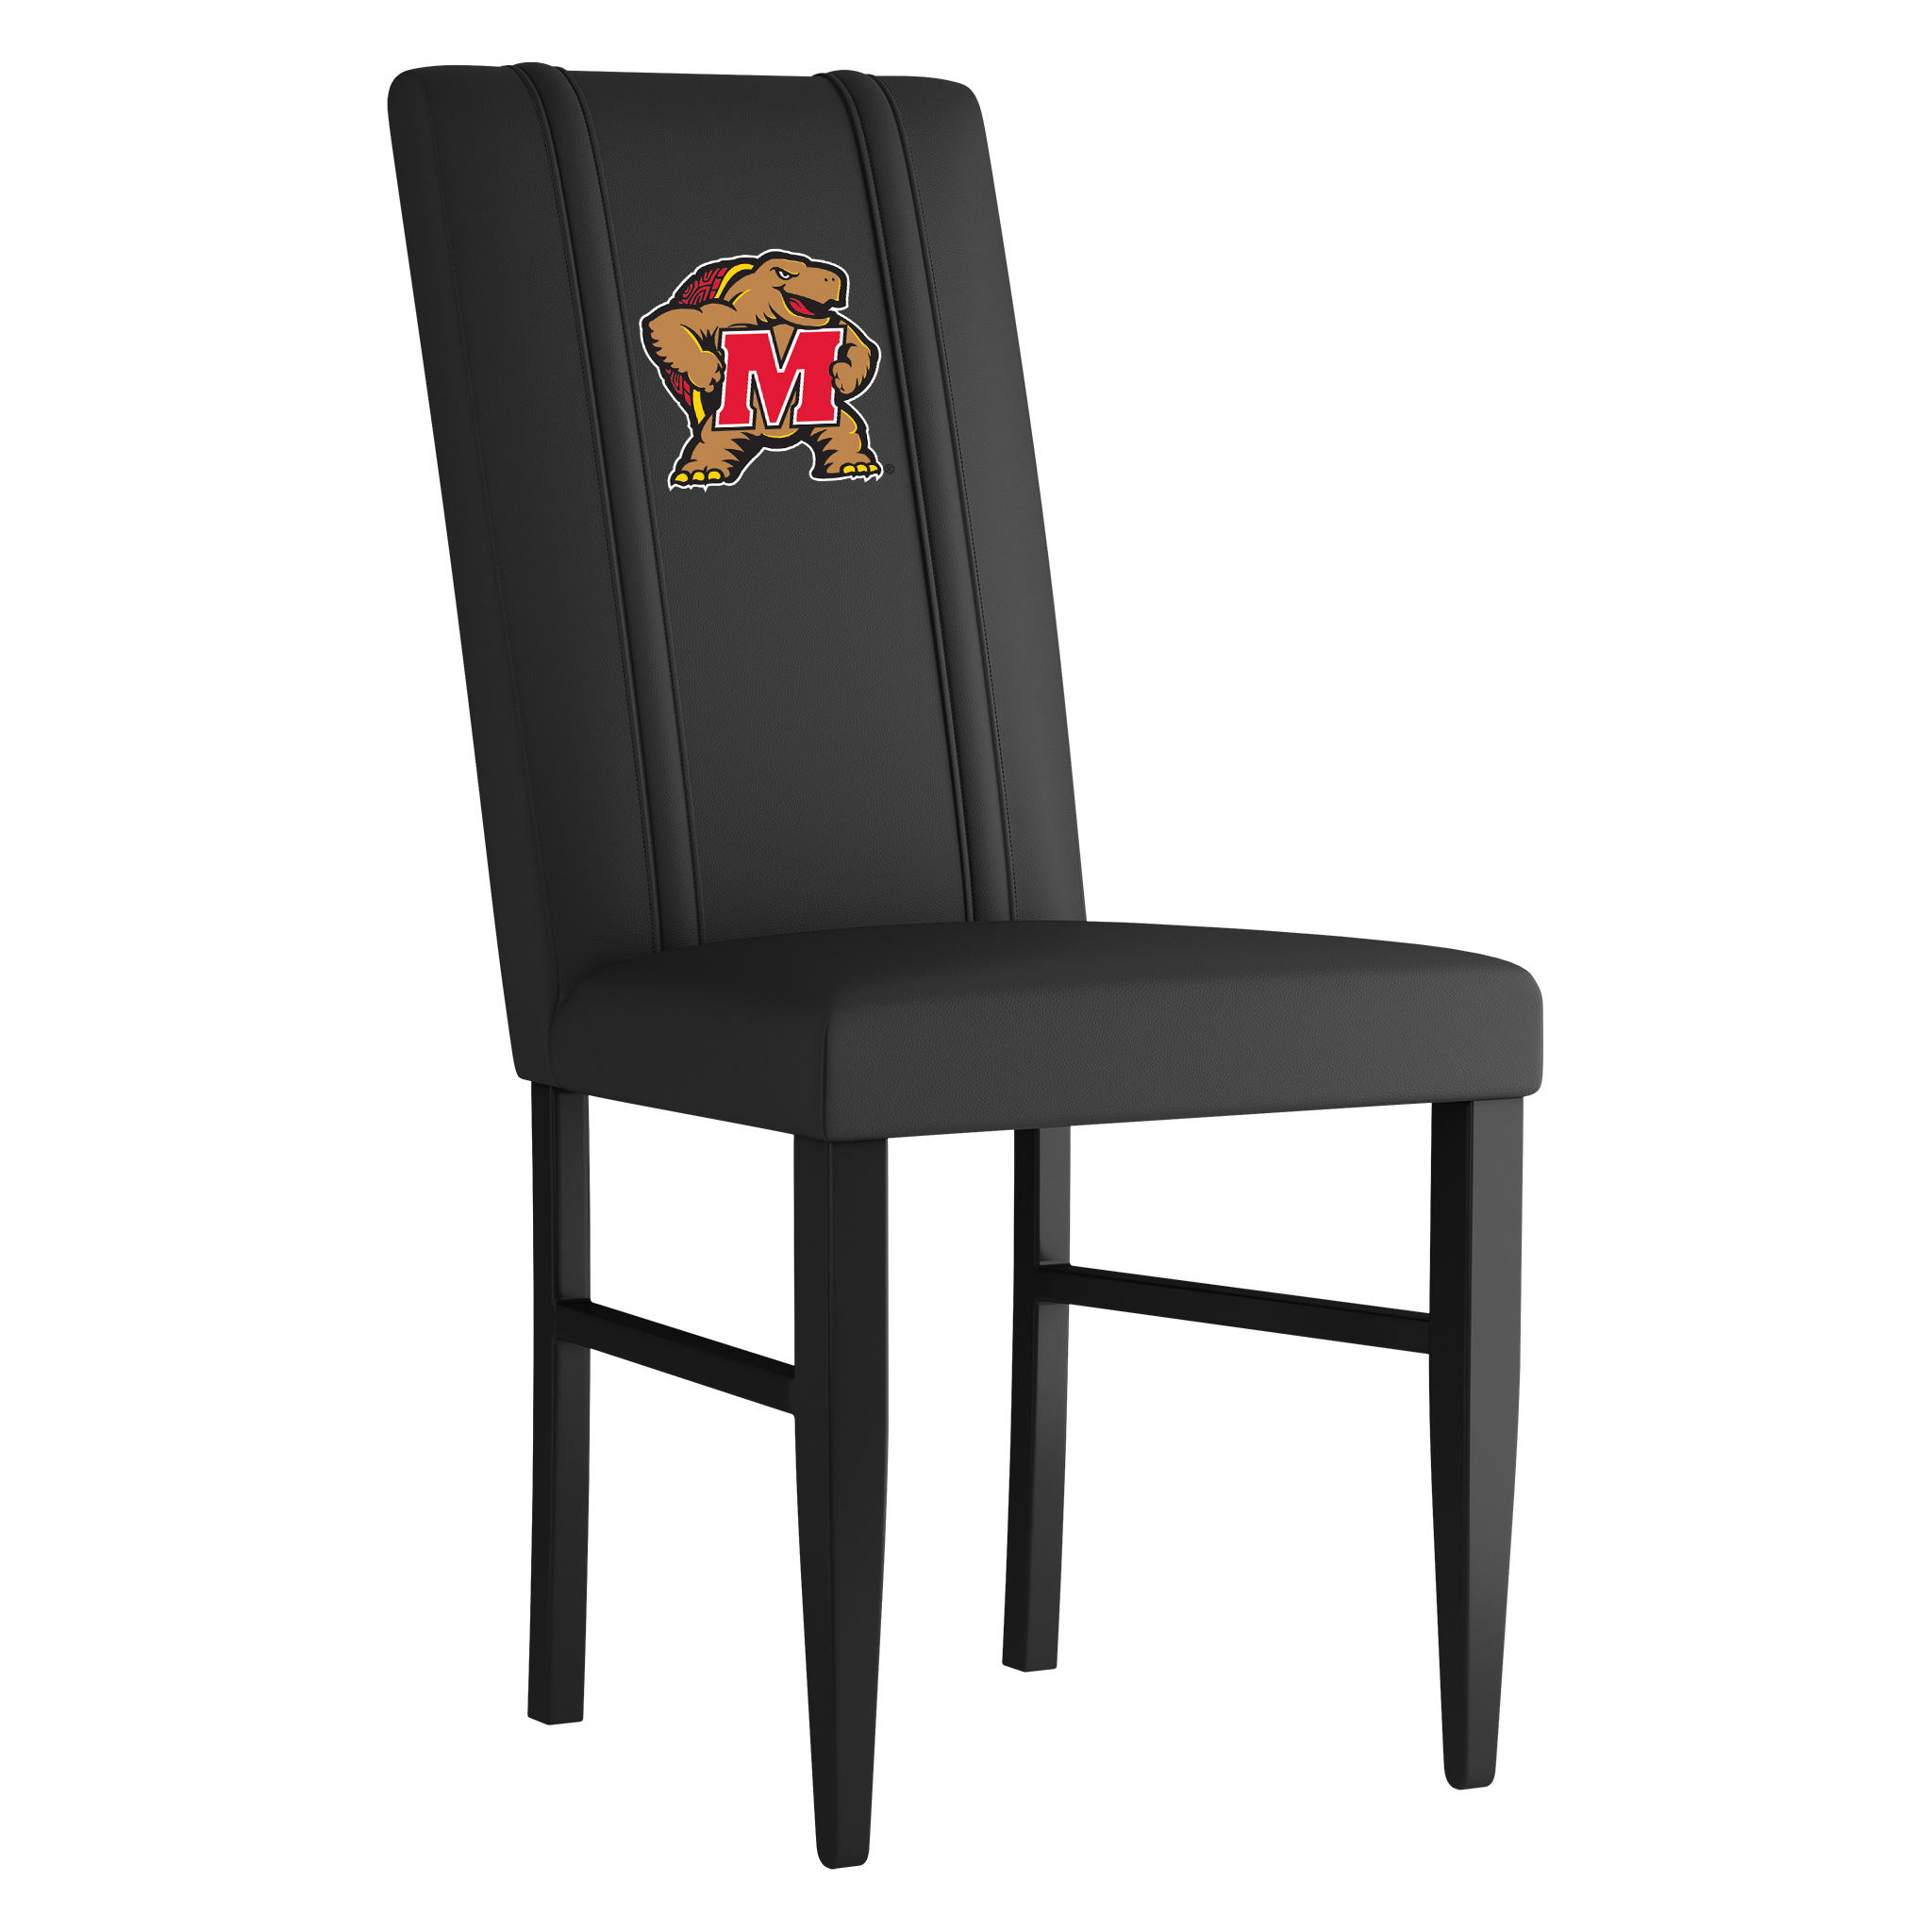 Maryland Terrapins Side Chair 2000 With Maryland Terrapins Logo